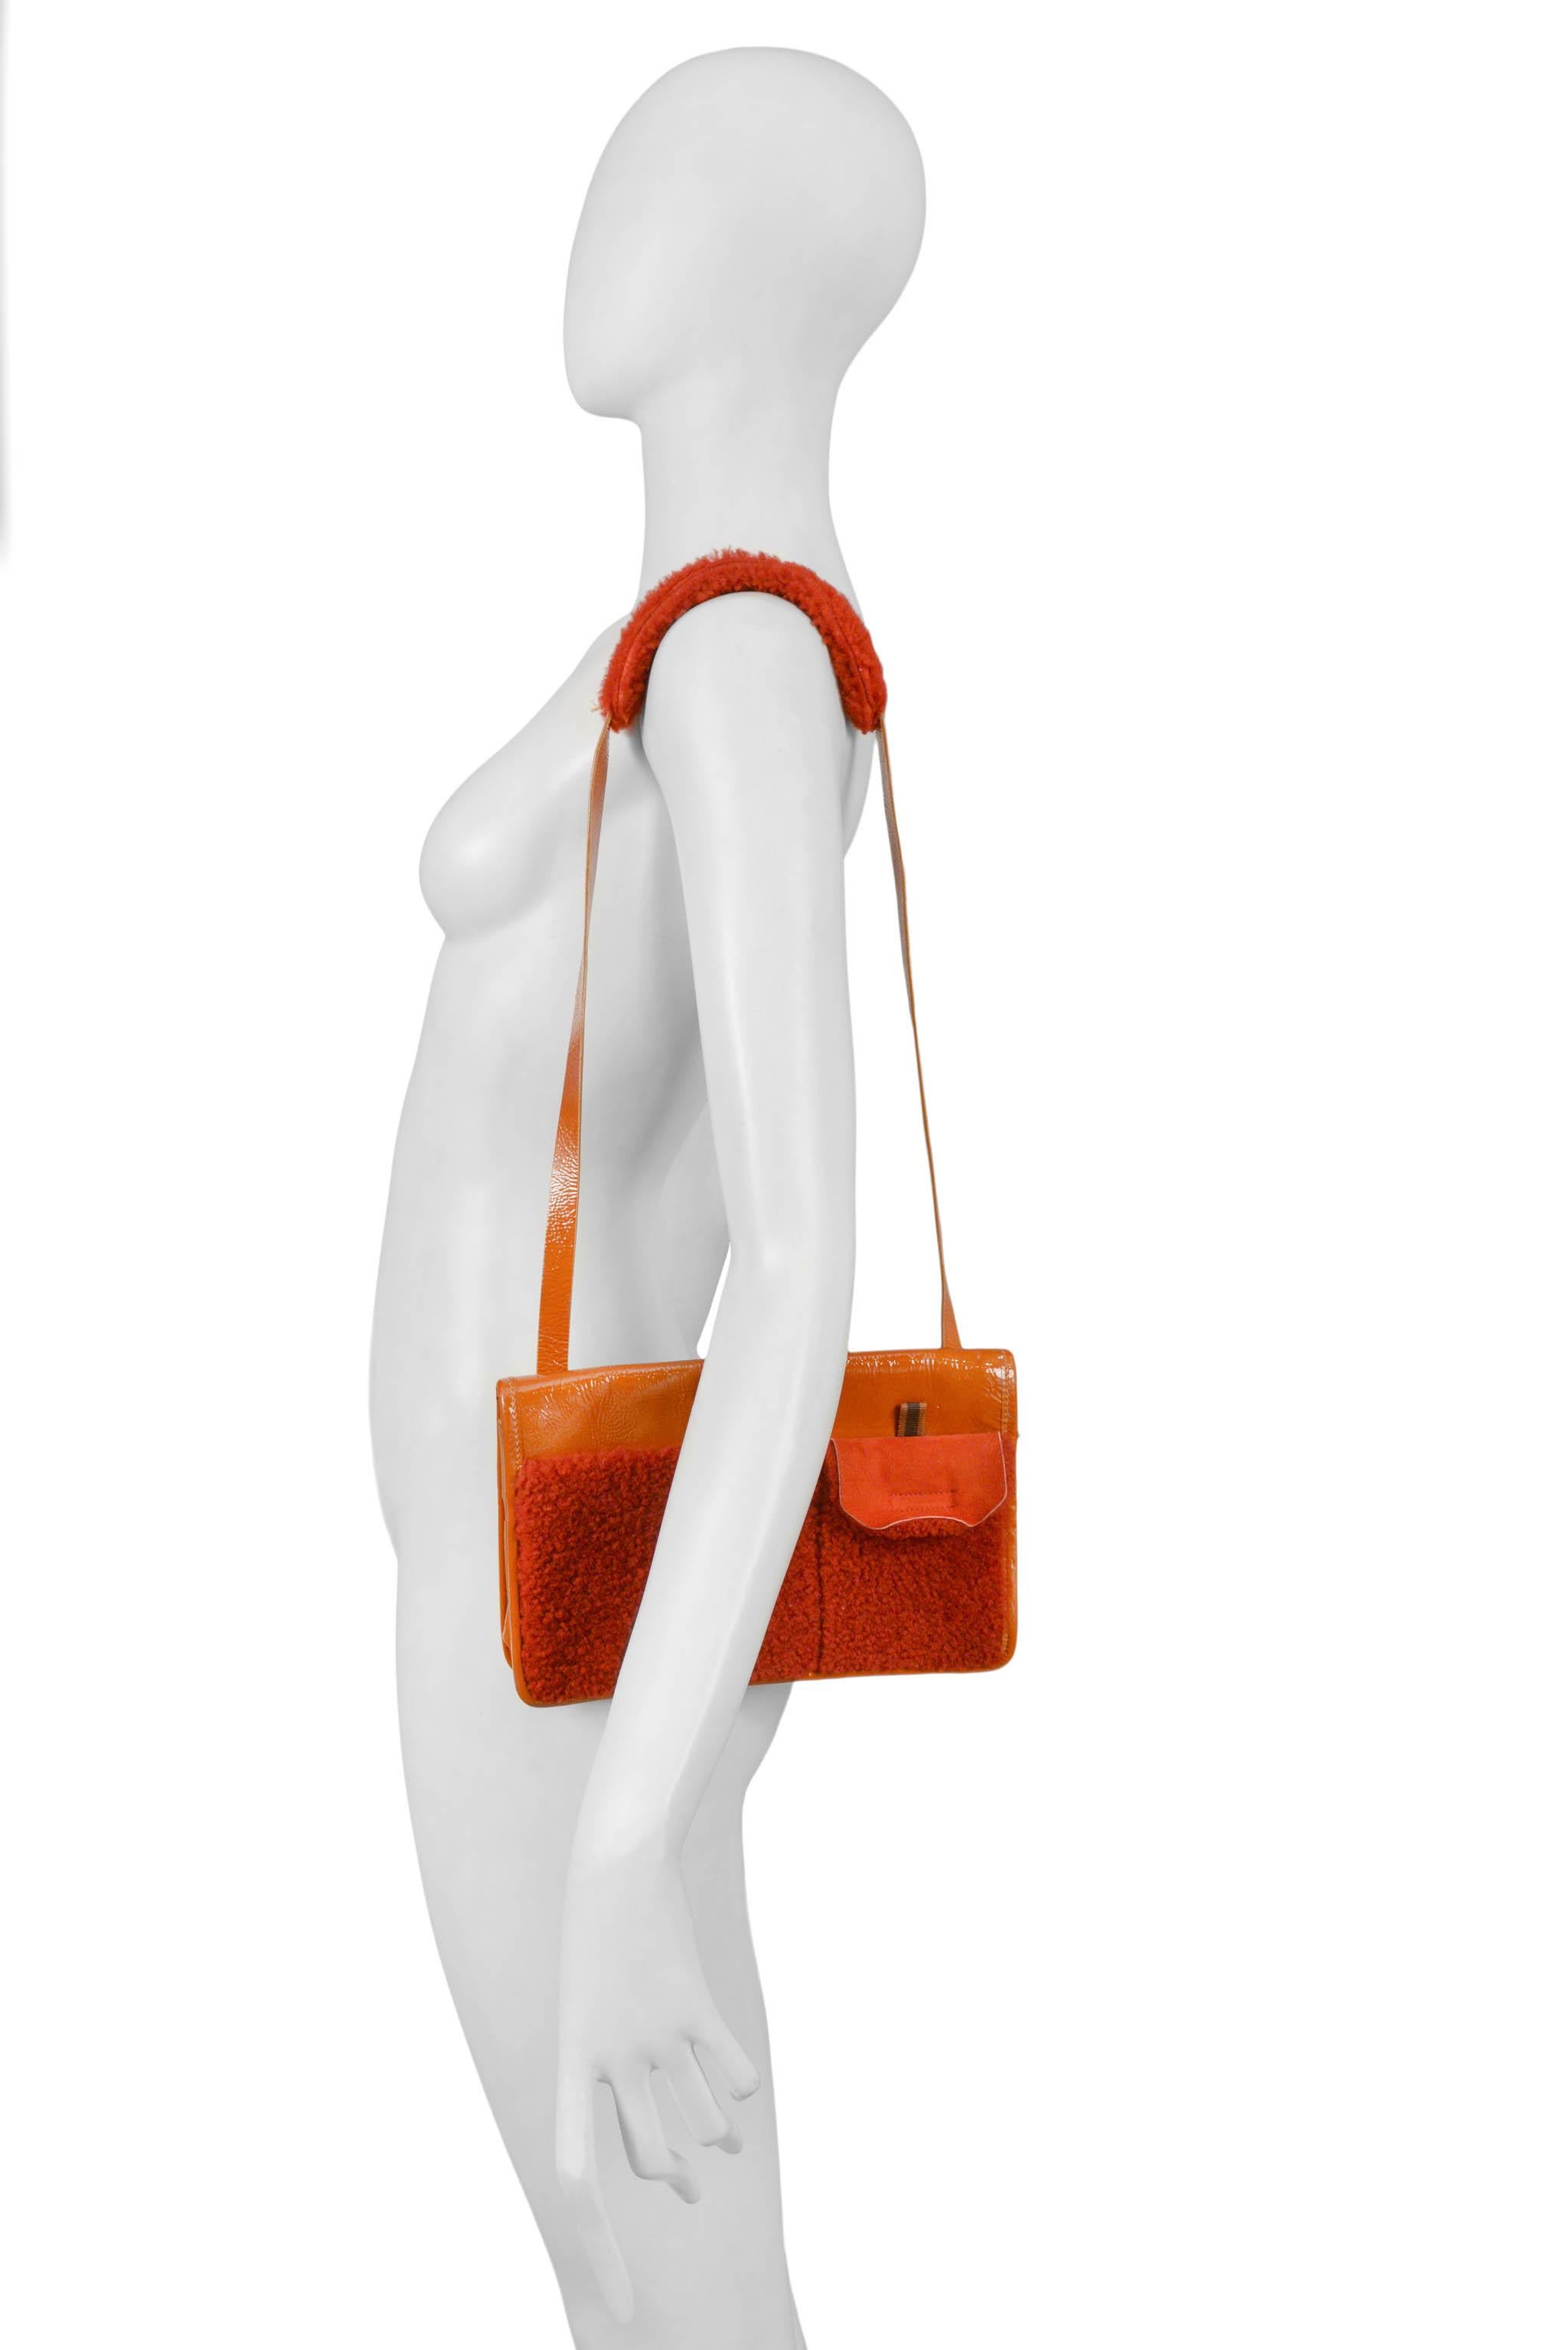 Resurrection Vintage is excited to offer a vintage 1990s Miu Miu red and orange patent leather and shearling shoulder bag featuring small pocket with velcro closure, back slit pocket with velcro closure, shearling shoulder pad, and nylon interior